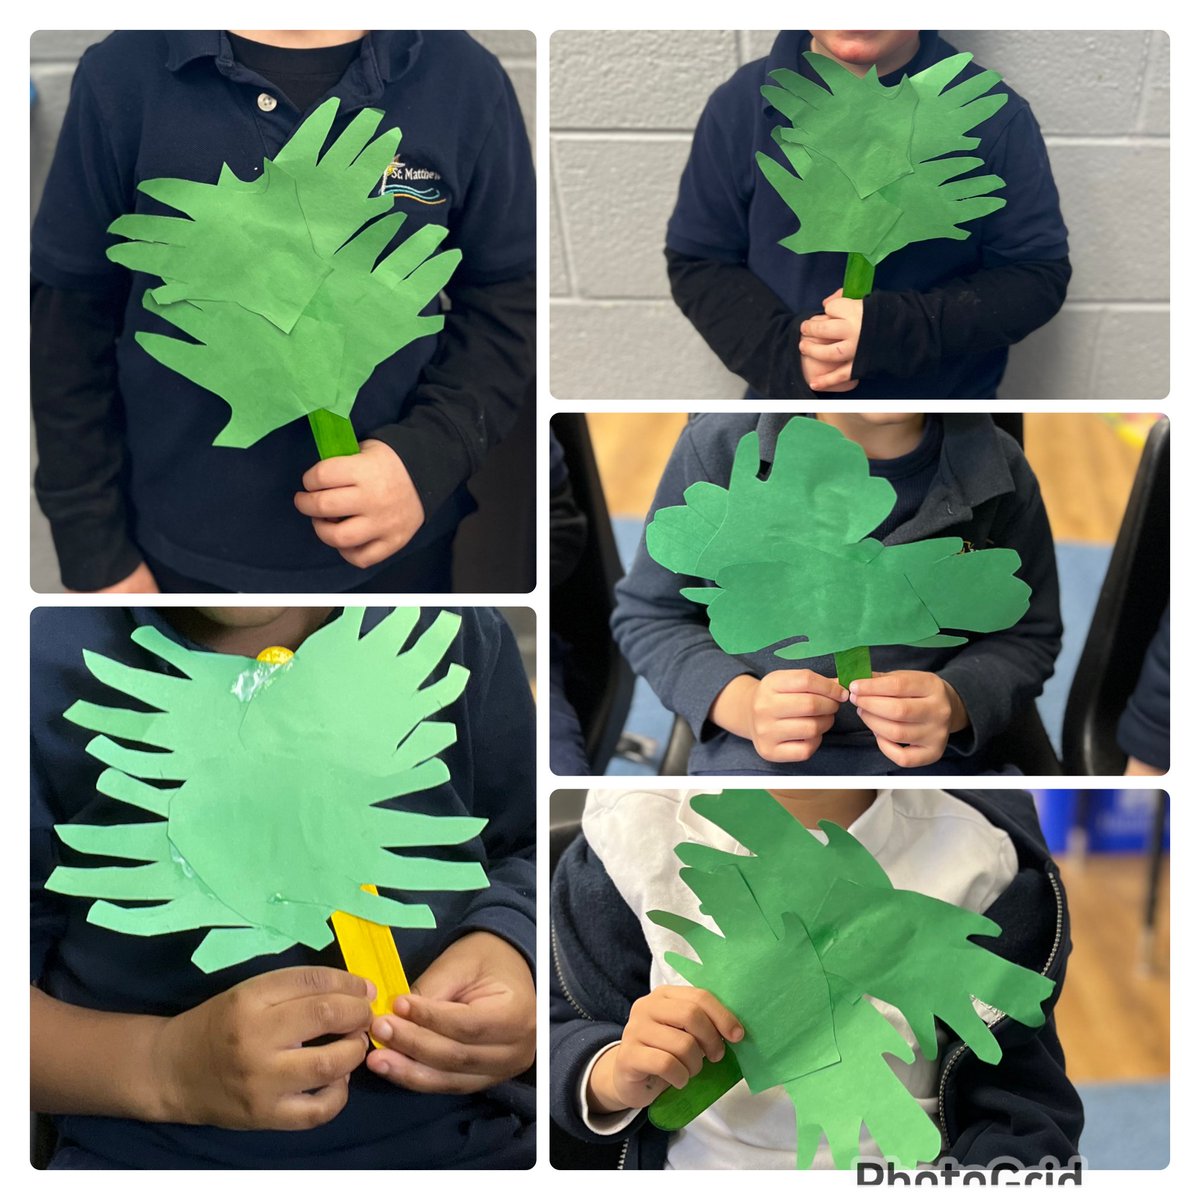 Hosanna in the Highest! Sunday is the beginning of Holy Week and today Mrs. Silva’s class made palms in preparation of Palm Sunday #PalmSunday #HolyWeek @HWCDSBFaith @passion4prayers @HWCDSB